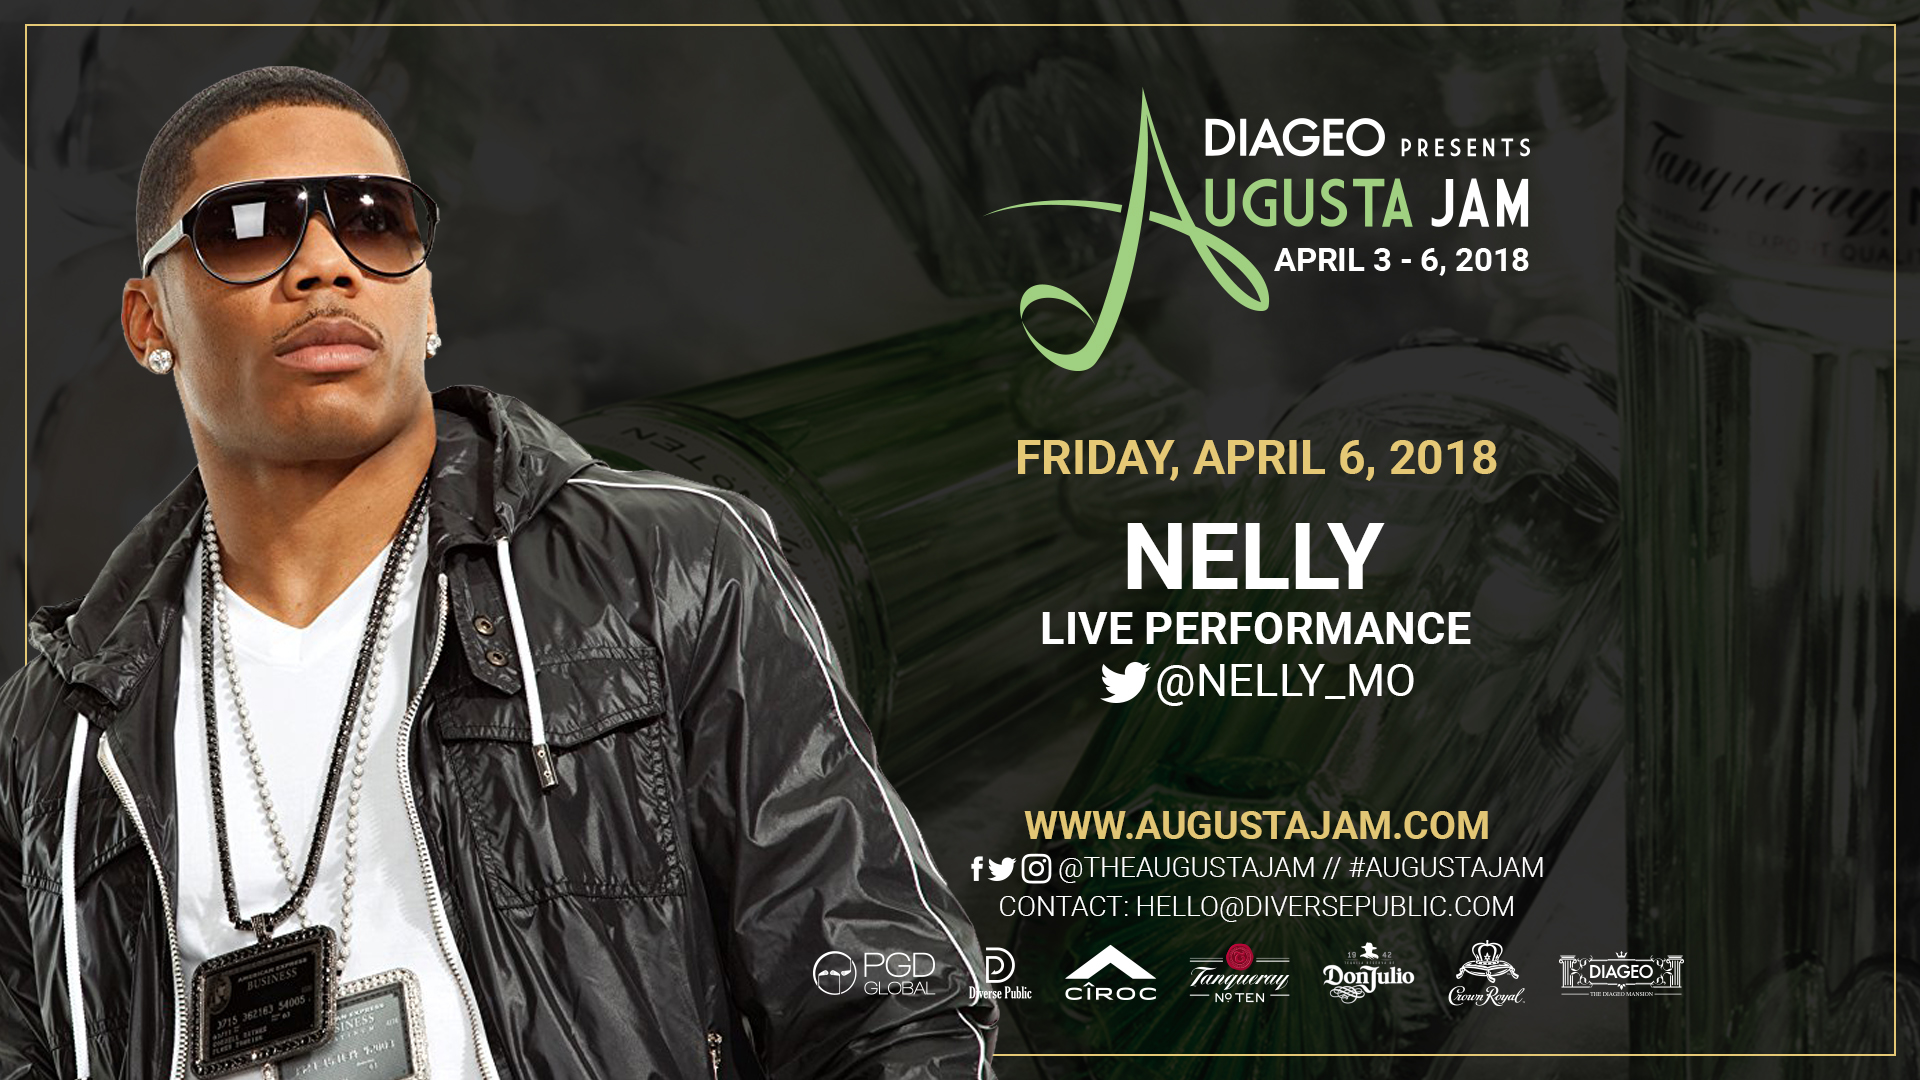 Nelly to perform at 2018 Augusta Jam